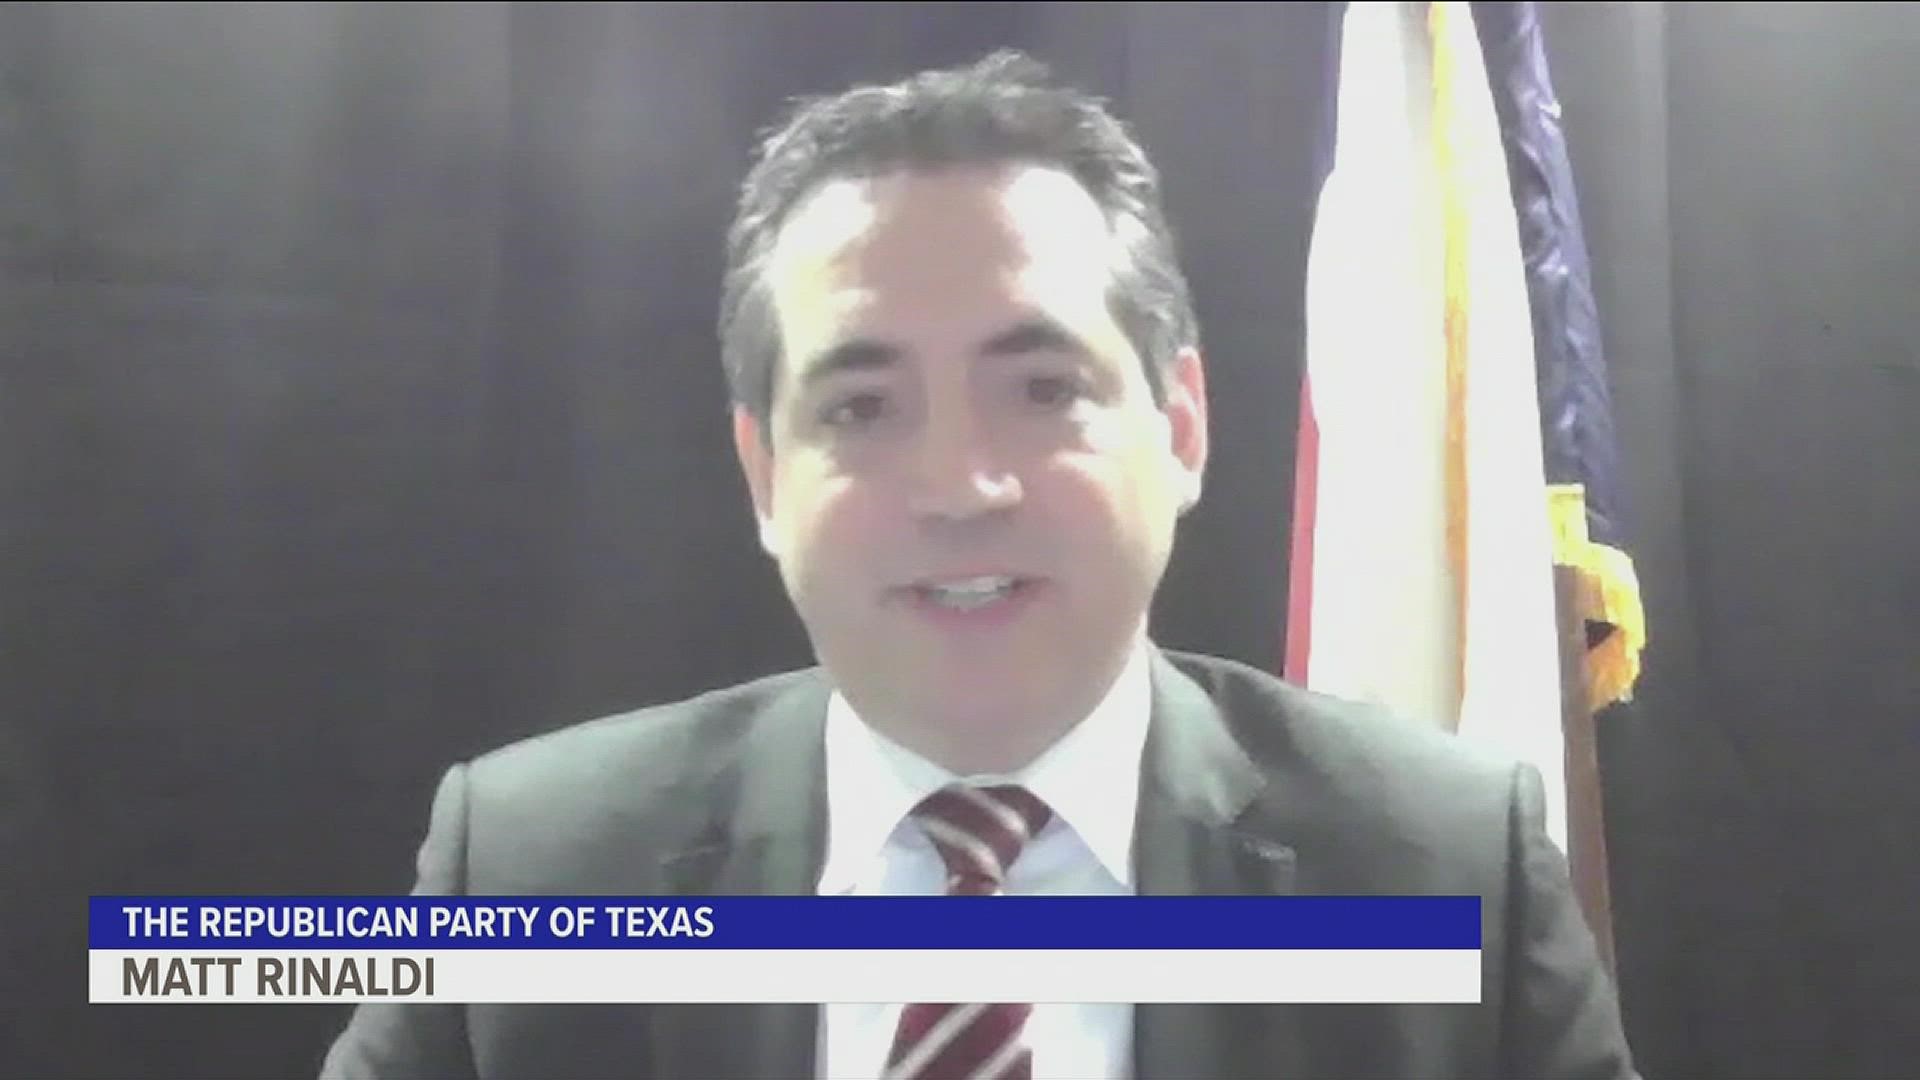 “We don’t support any new restrictions of gun laws because we don’t think it will work to make Texas safer,” Texas GOP chair Matt Rinaldi told Inside Texas Politics.